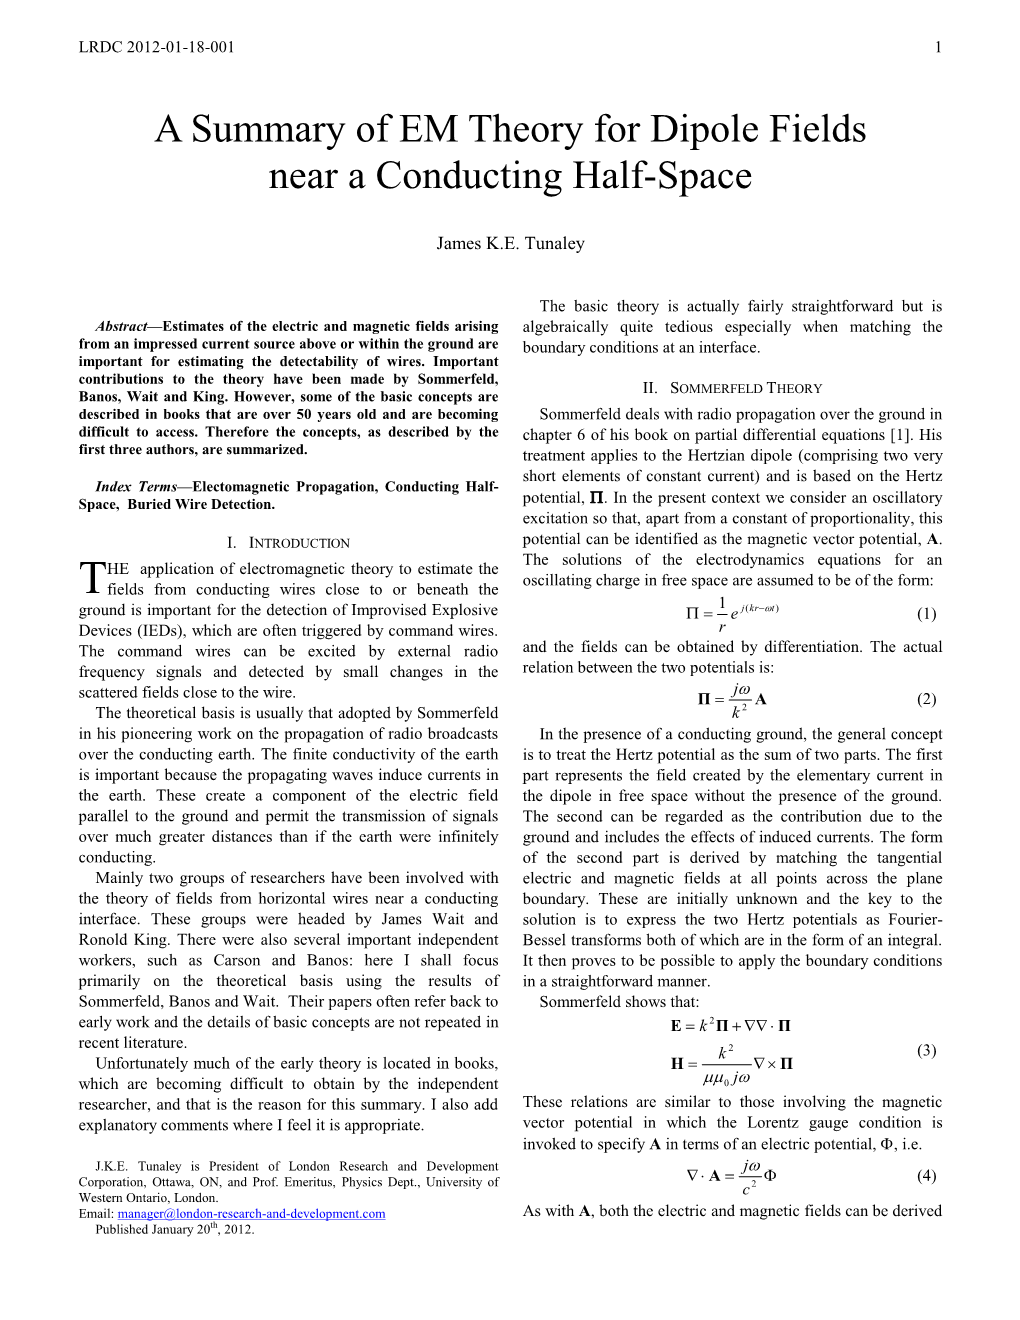 A Summary of EM Theory for Dipole Fields Near a Conducting Half-Space